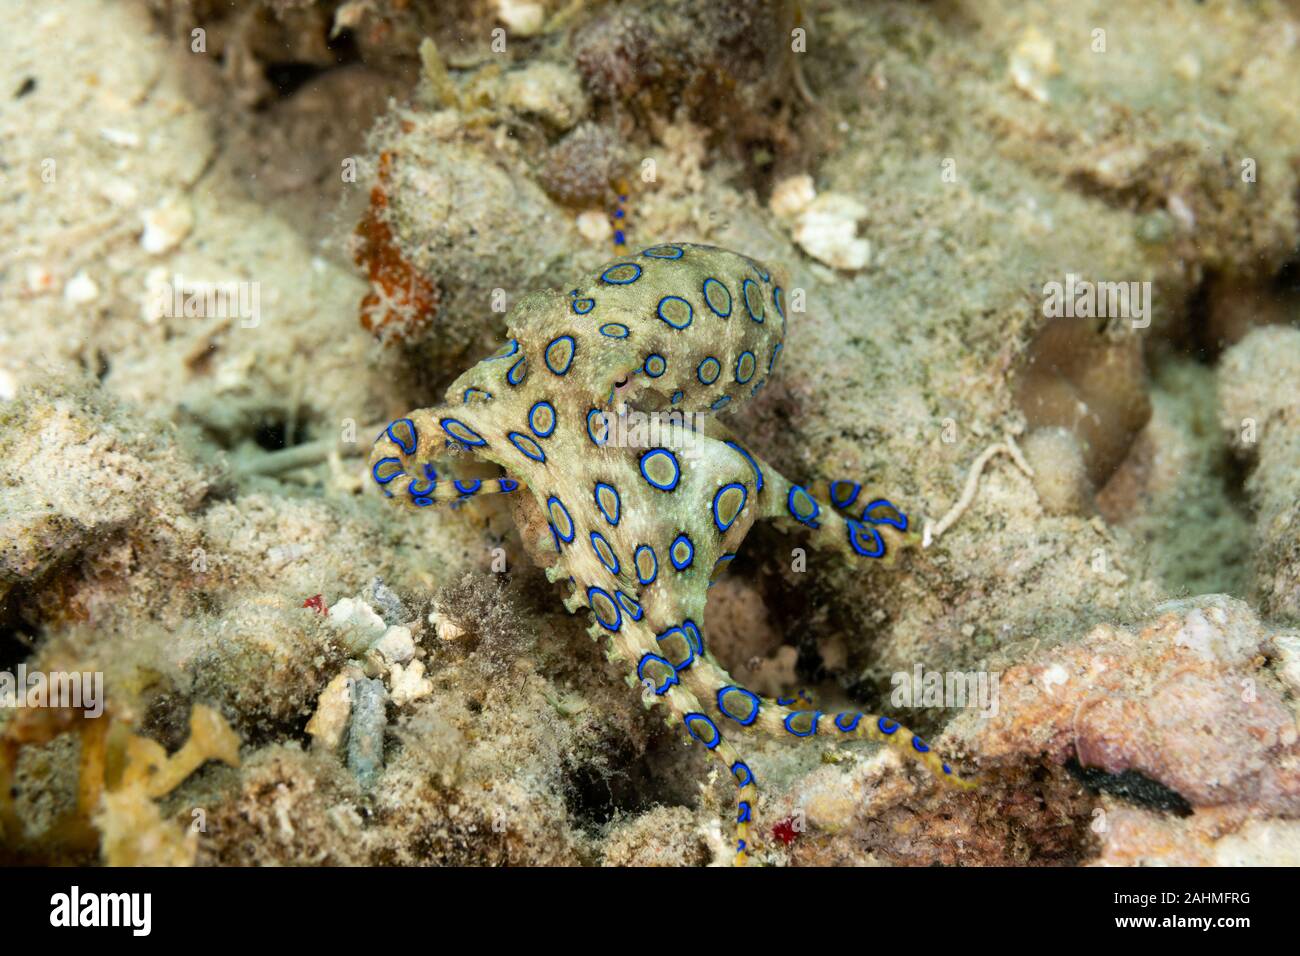 Greater blue-ringed octopus, Hapalochlaena lunulata is one of four species  of highly venomous blue-ringed octopuses belonging to the family Octopodida  Stock Photo - Alamy